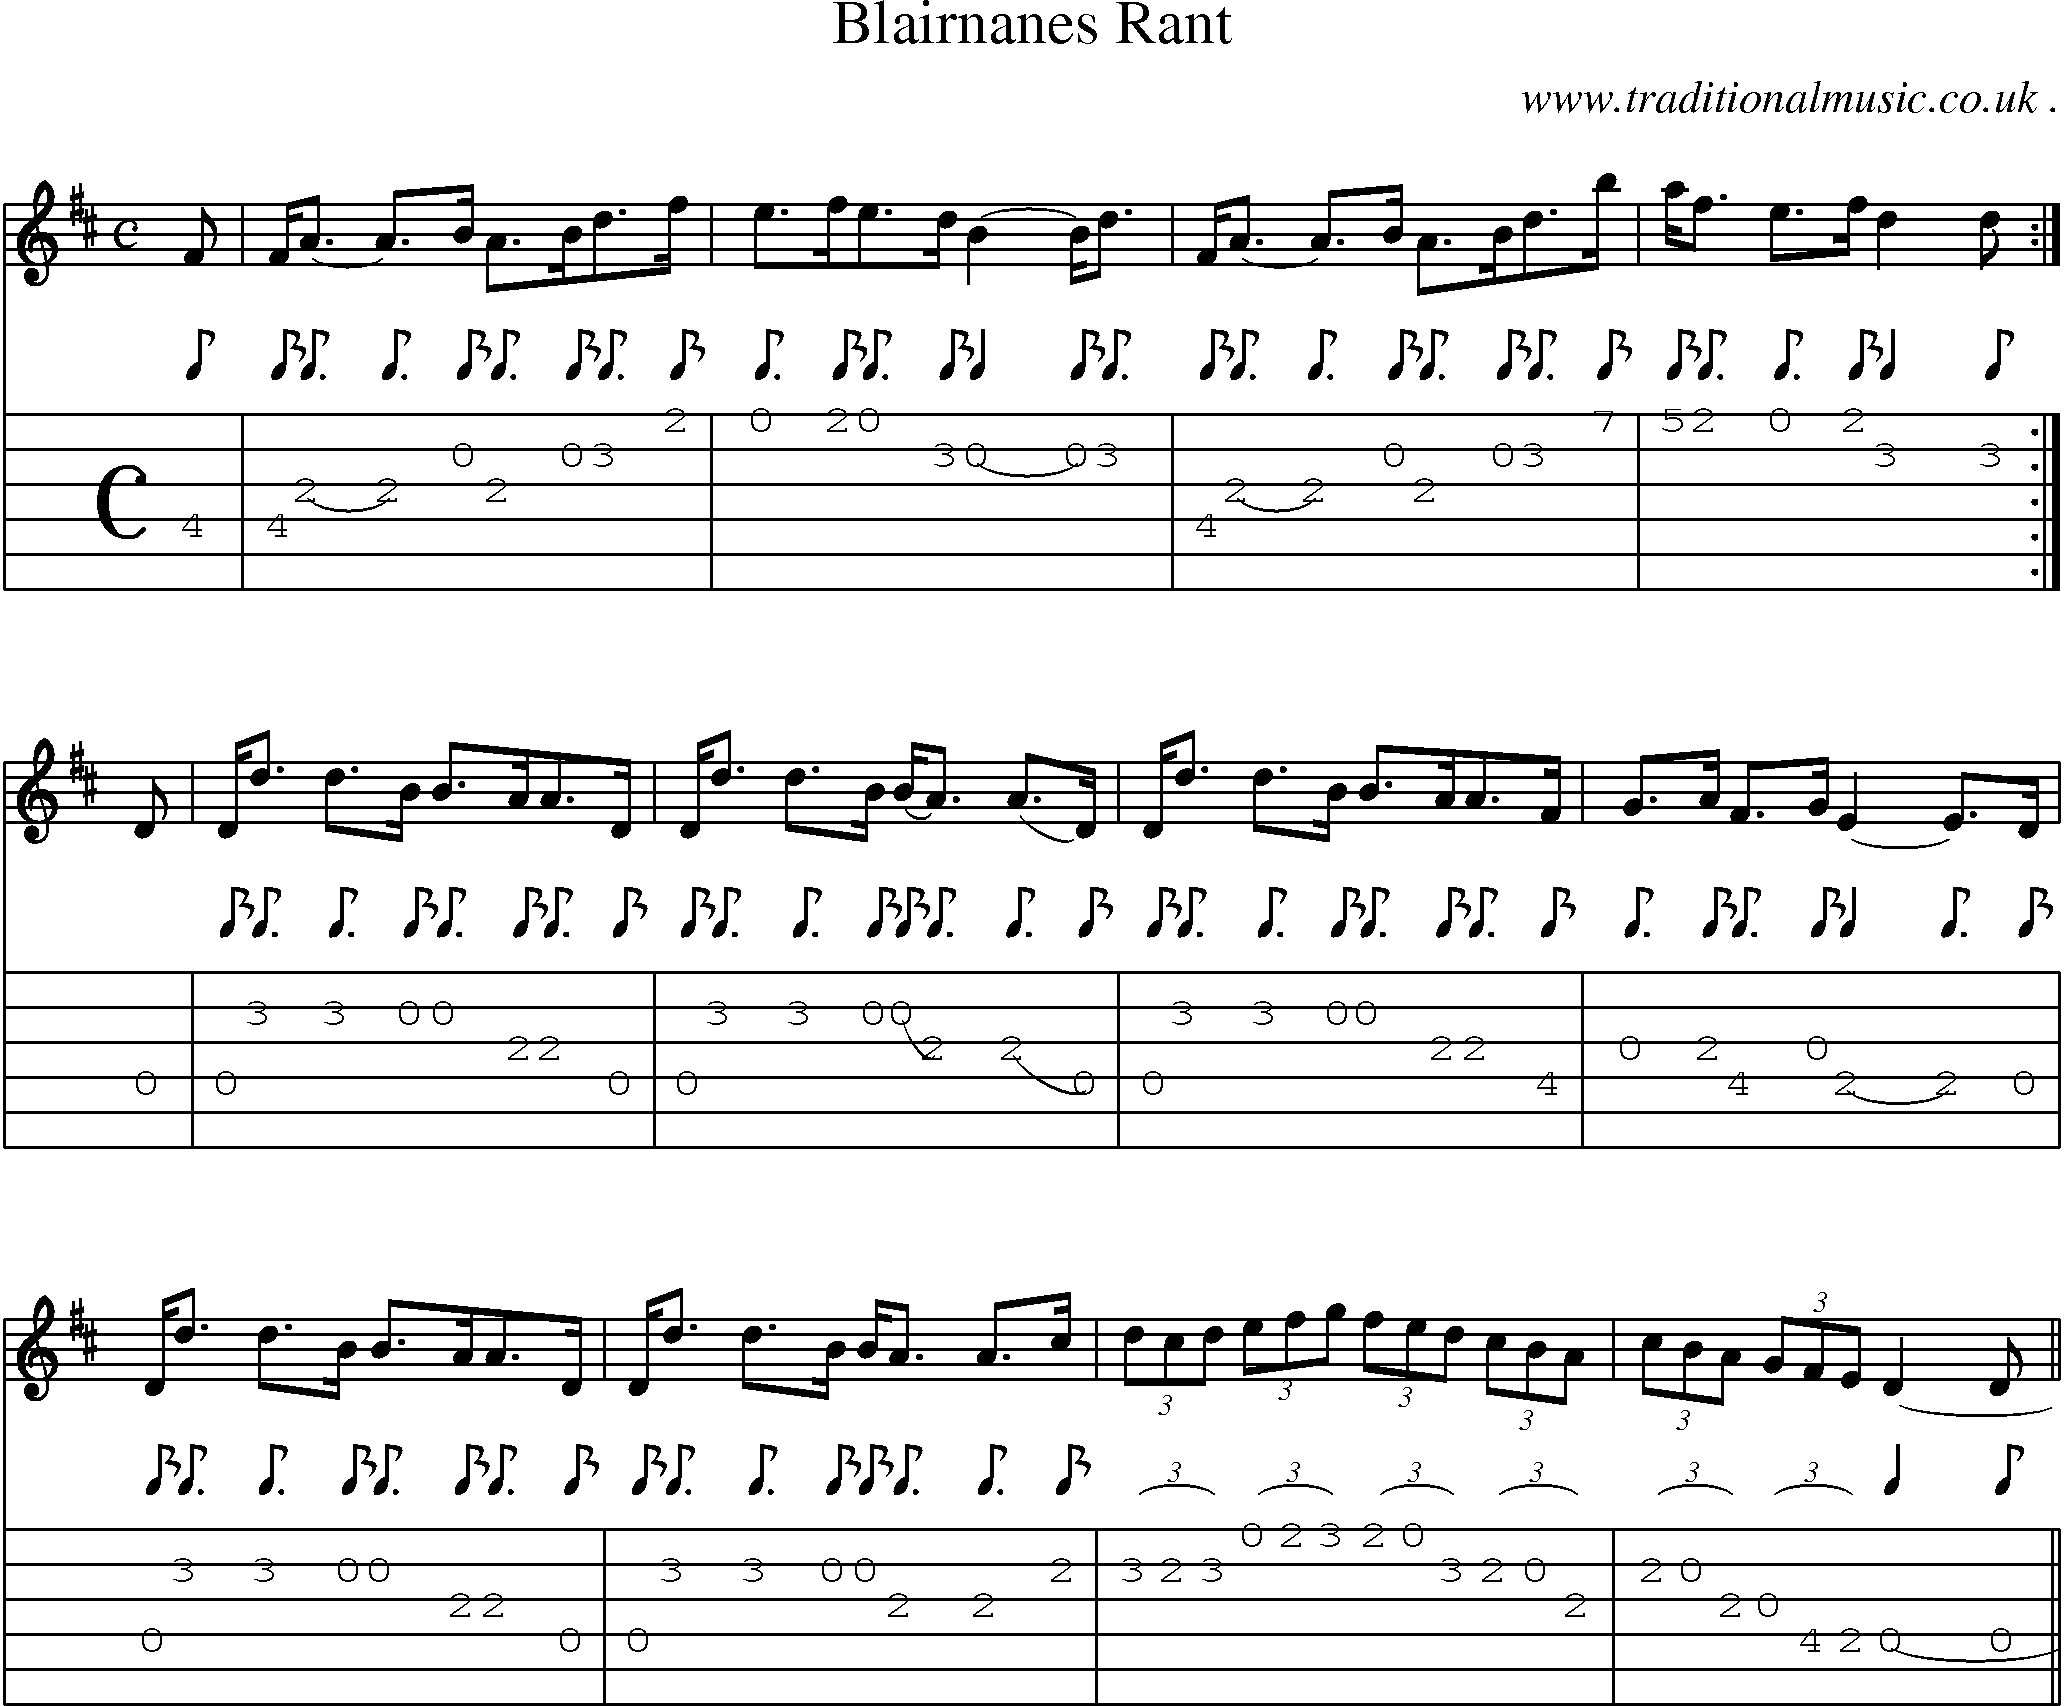 Sheet-music  score, Chords and Guitar Tabs for Blairnanes Rant